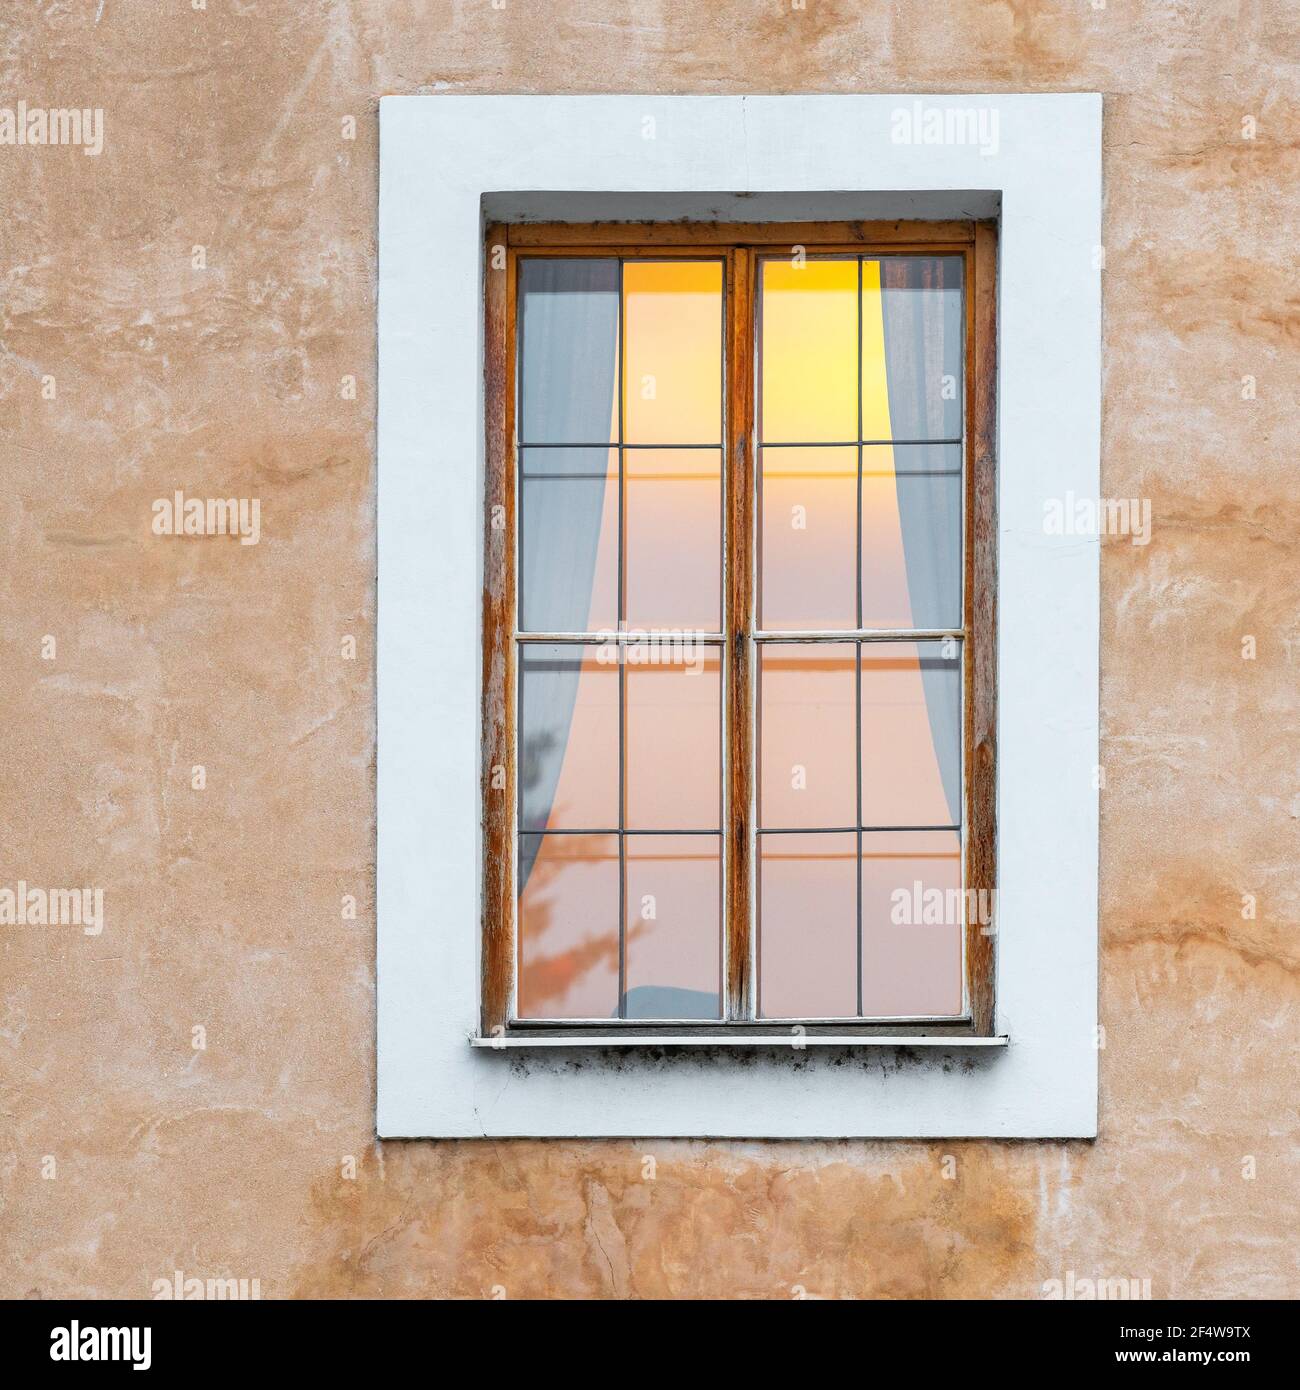 Romanesque style architecture facade with window and interior atmosphere light, Prague city, Czech Republic. Stock Photo